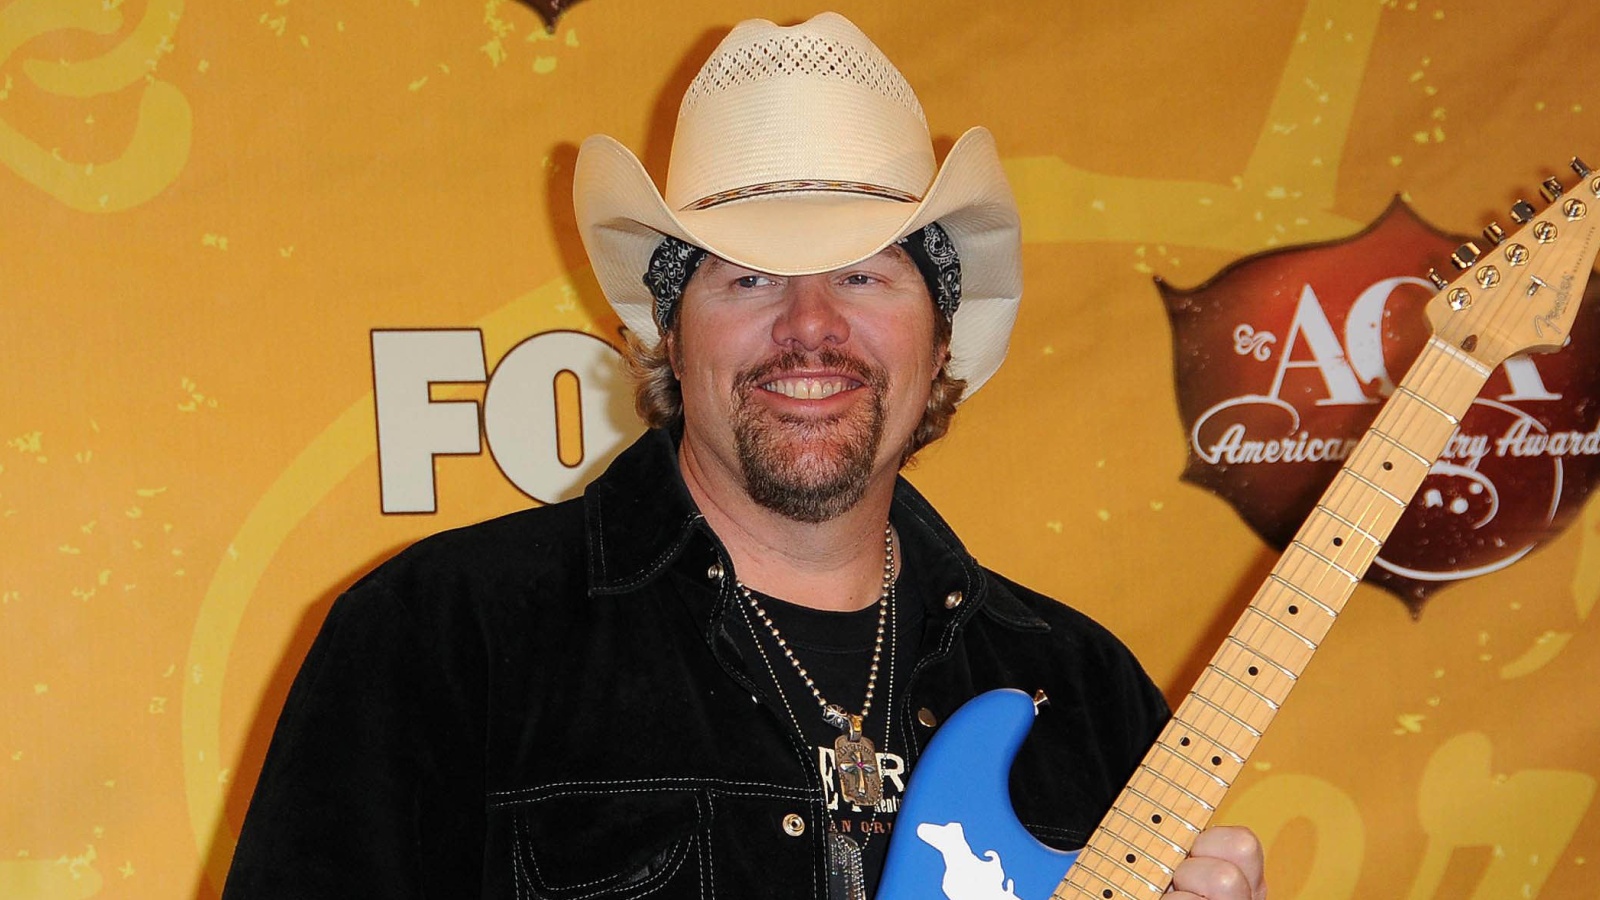 <p><span>Famed country music star Toby Keith died on February 5 from stomach cancer. The iconic singer was 62 years old. Toby is a multi-award-winning singer with hits such as <em>Red Solo Cup</em>, <em>Should Have Been a Cowboy</em>,<em> and How Do You Like Me Now</em>.</span></p><p><span>Toby rose to fame with his patriotic music following the 9/11 attacks on the Twin Towers. He has since become an iconic musician in the genre, teaming up with mega country stars like Willie Nelson.</span></p>